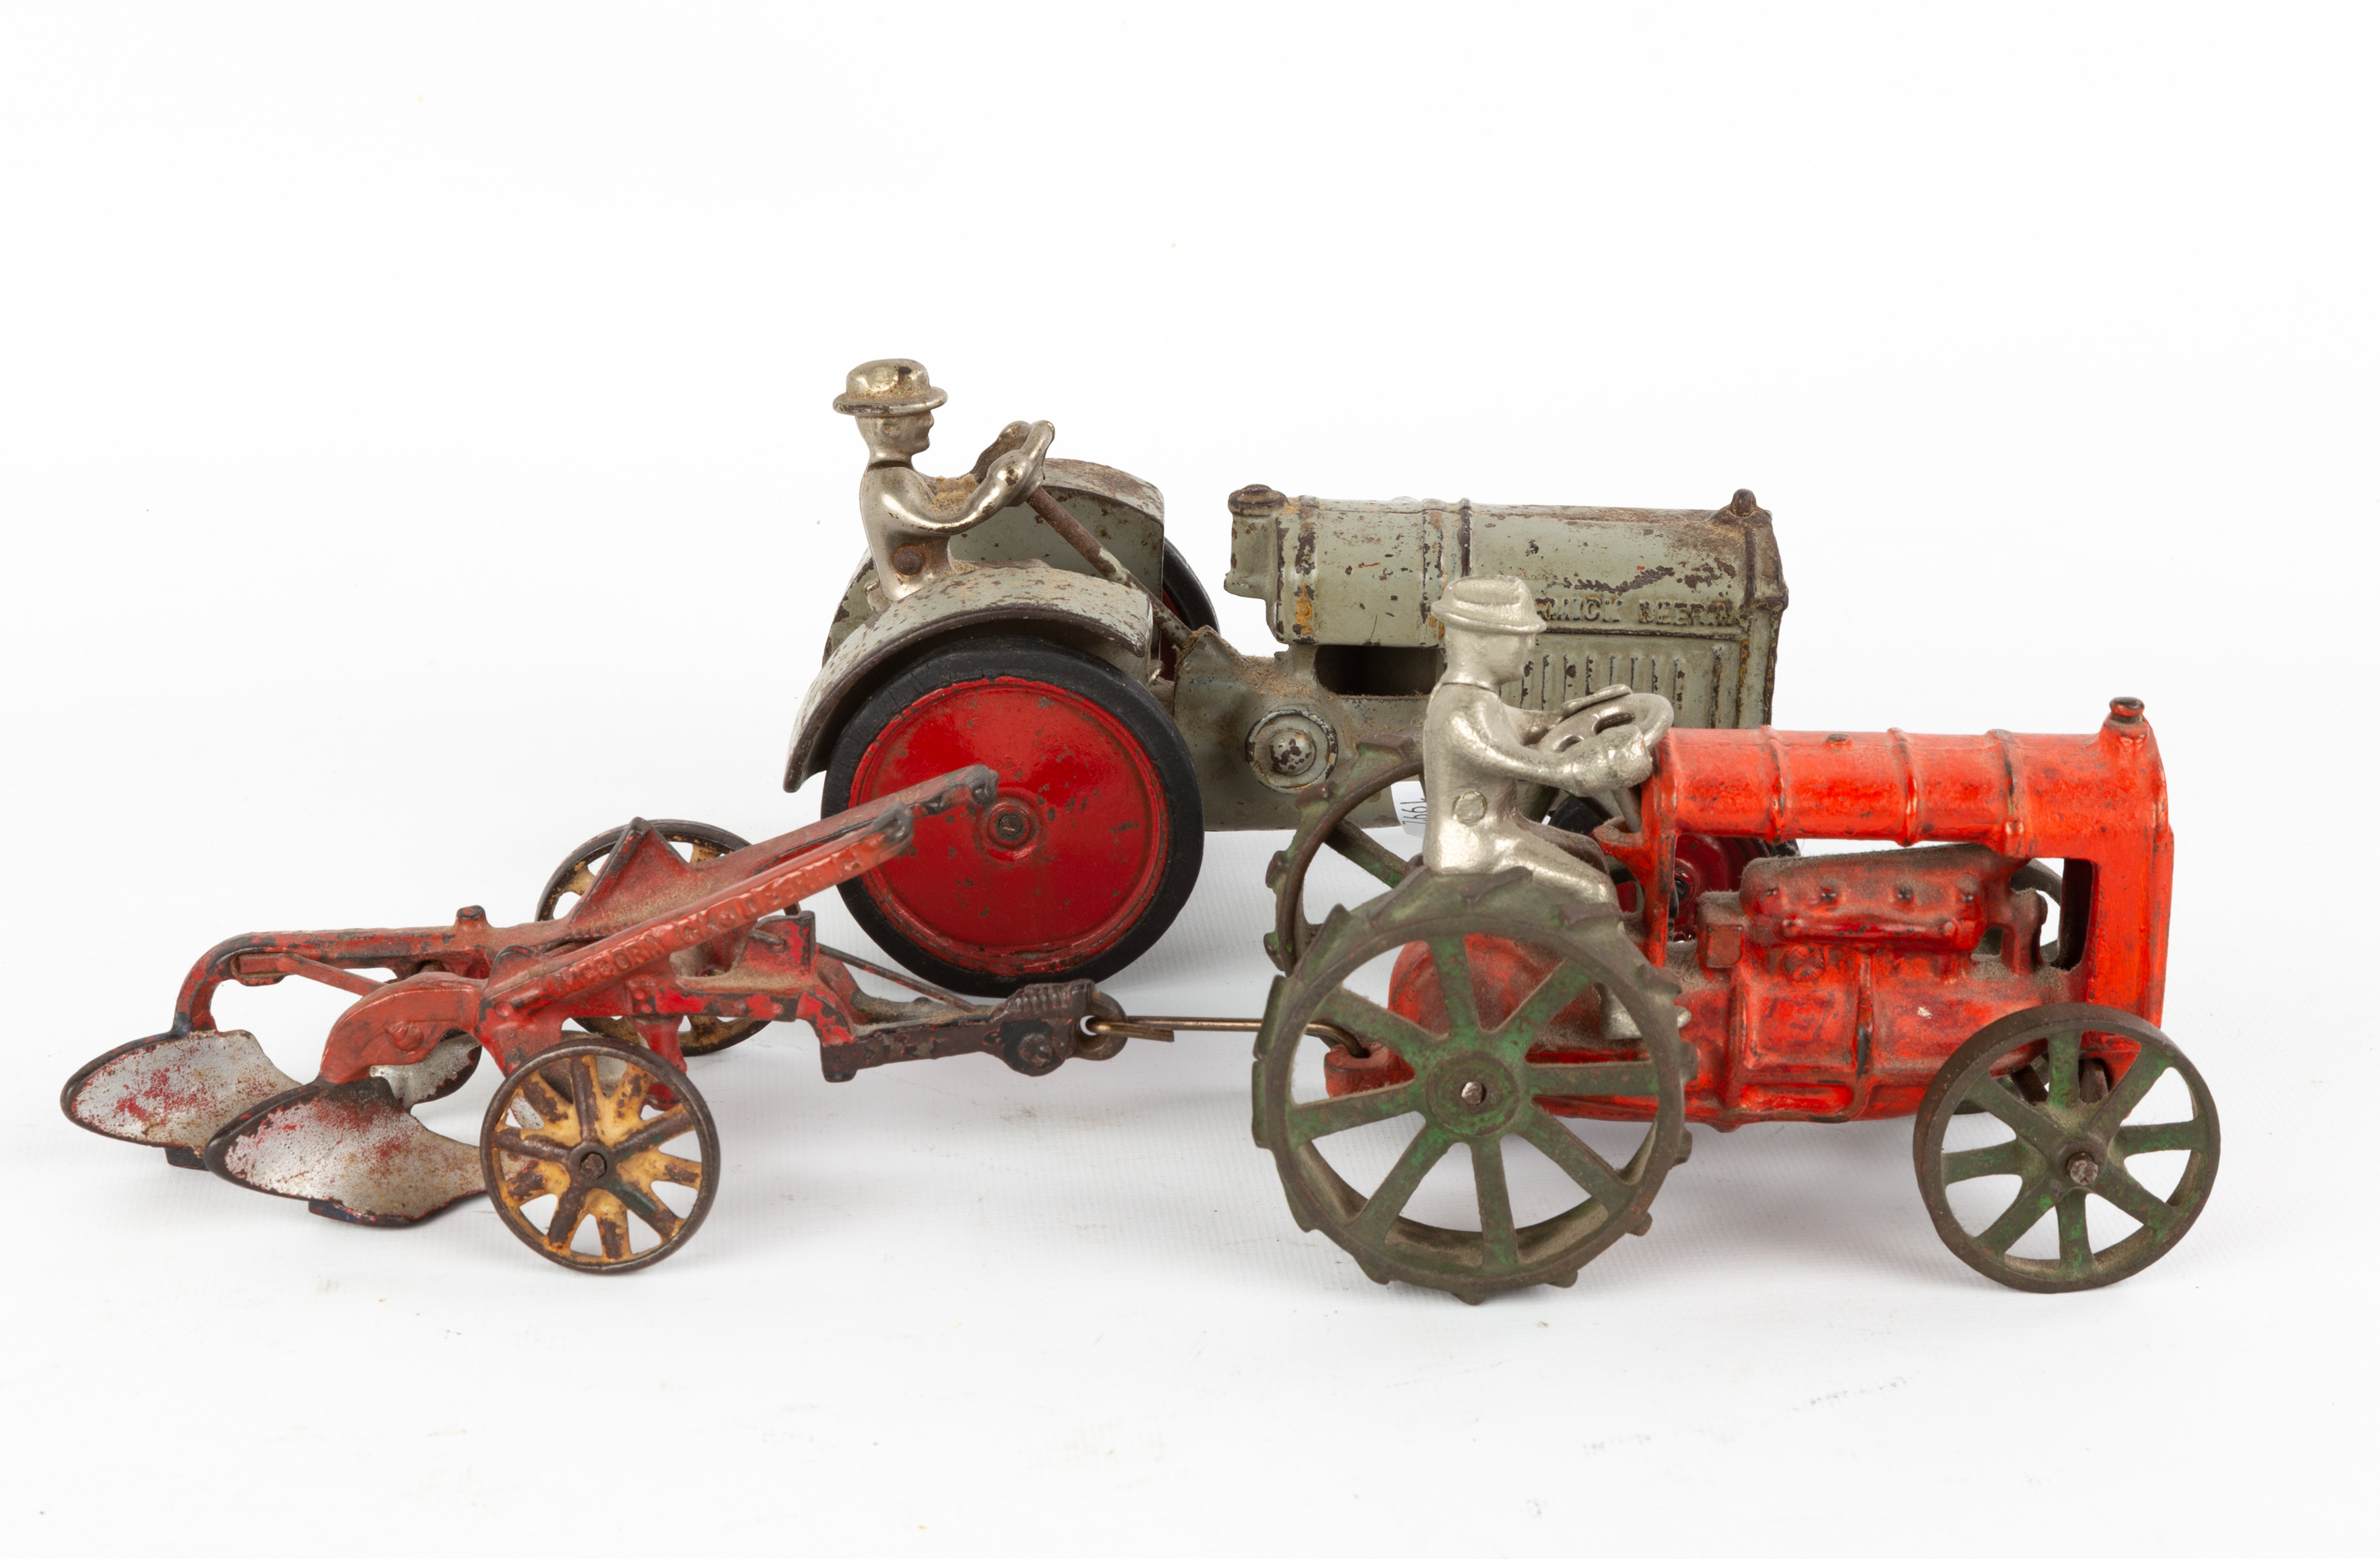  2 CAST IRON TRACTORS Early 20th 35328b